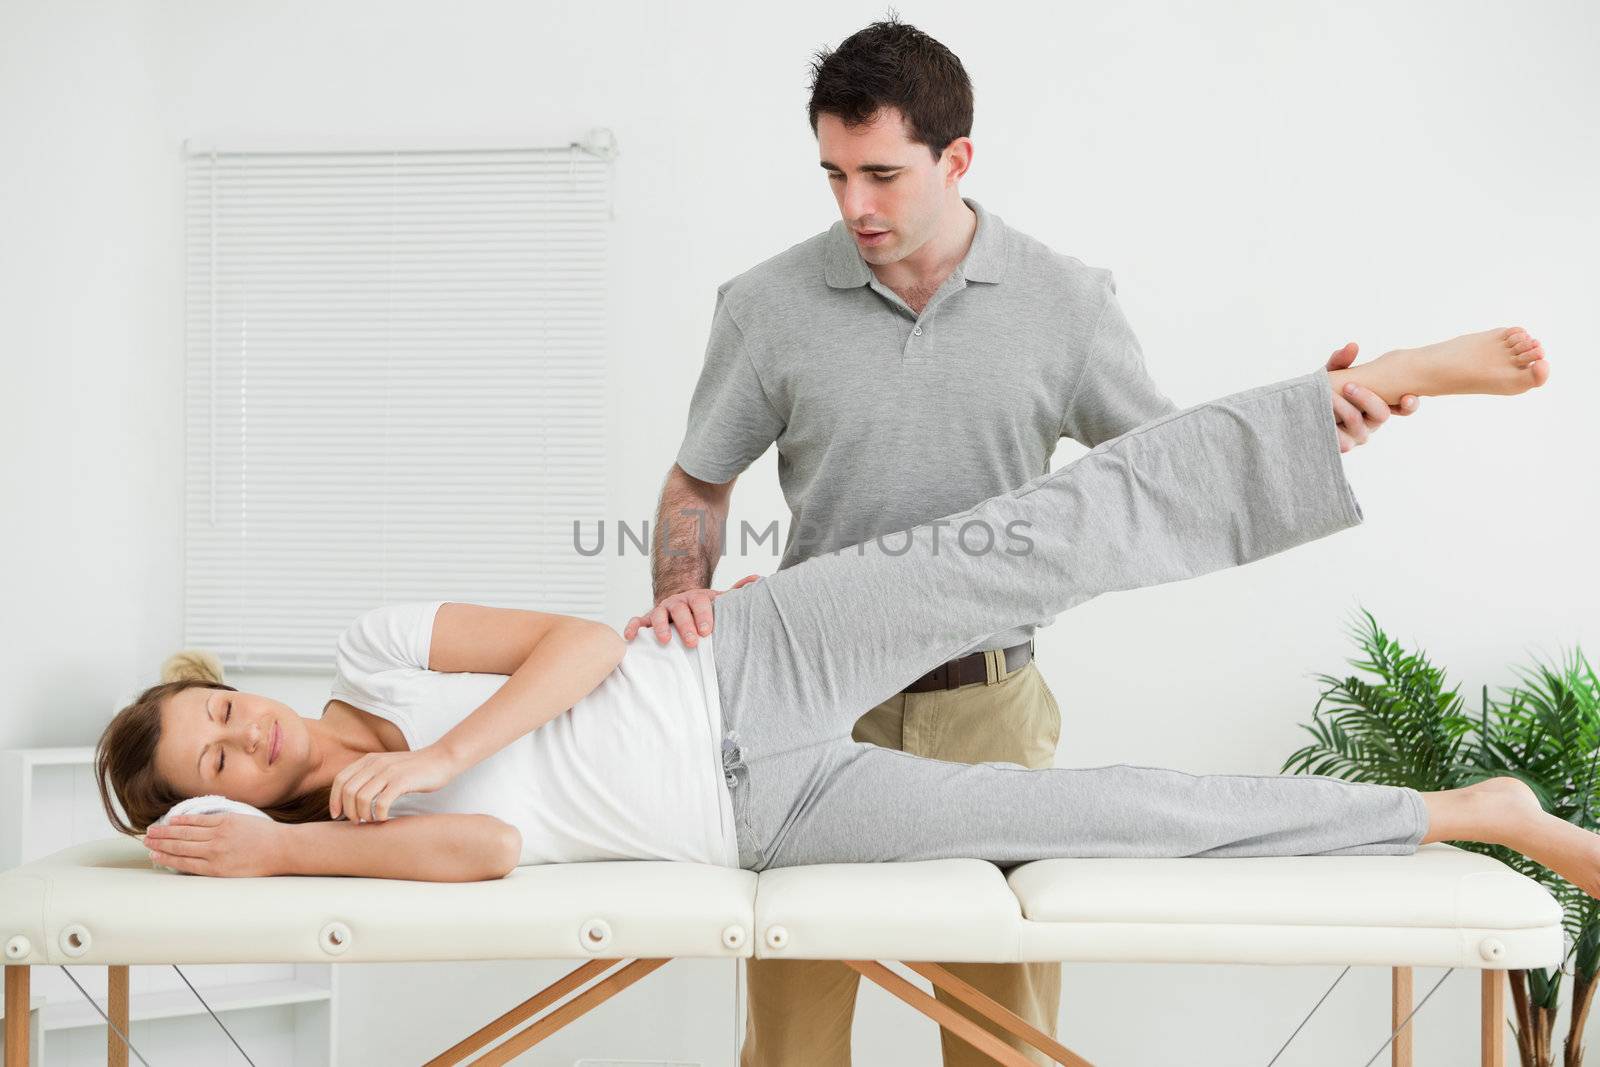 Serious practitioner rising the leg of his patient in his room